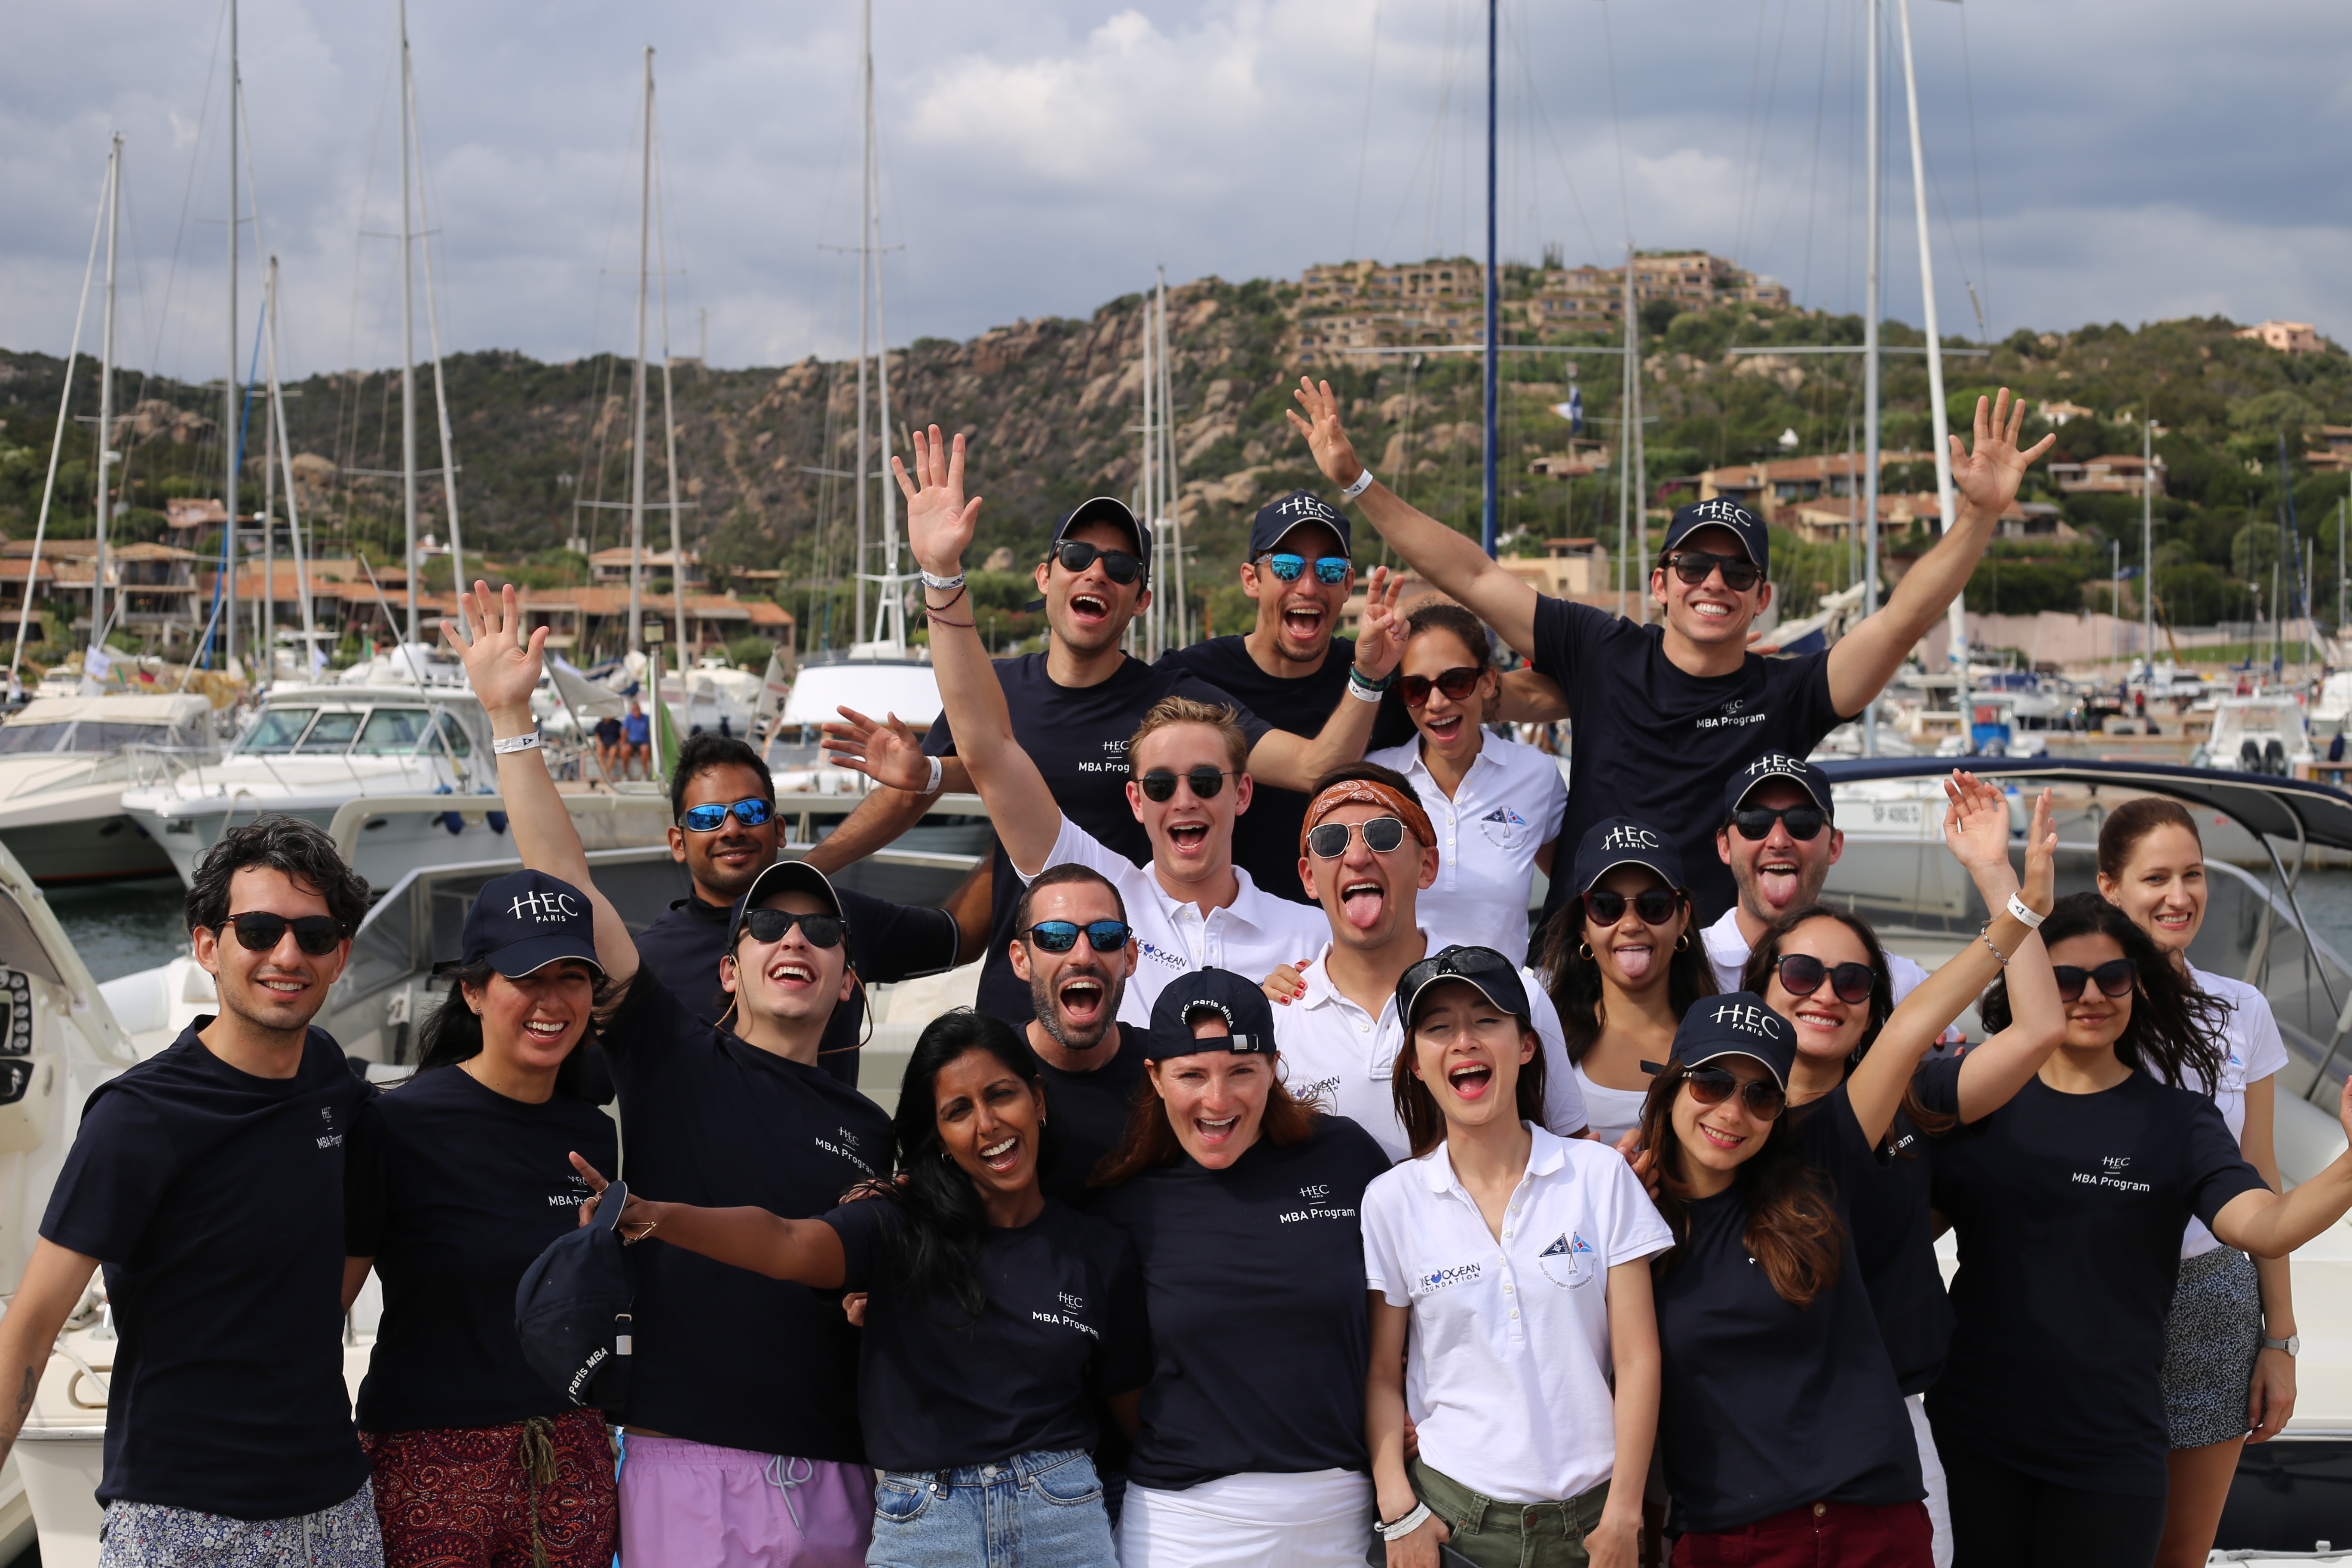 19 students and one HEC Paris MBA alumnus competing in the regatta